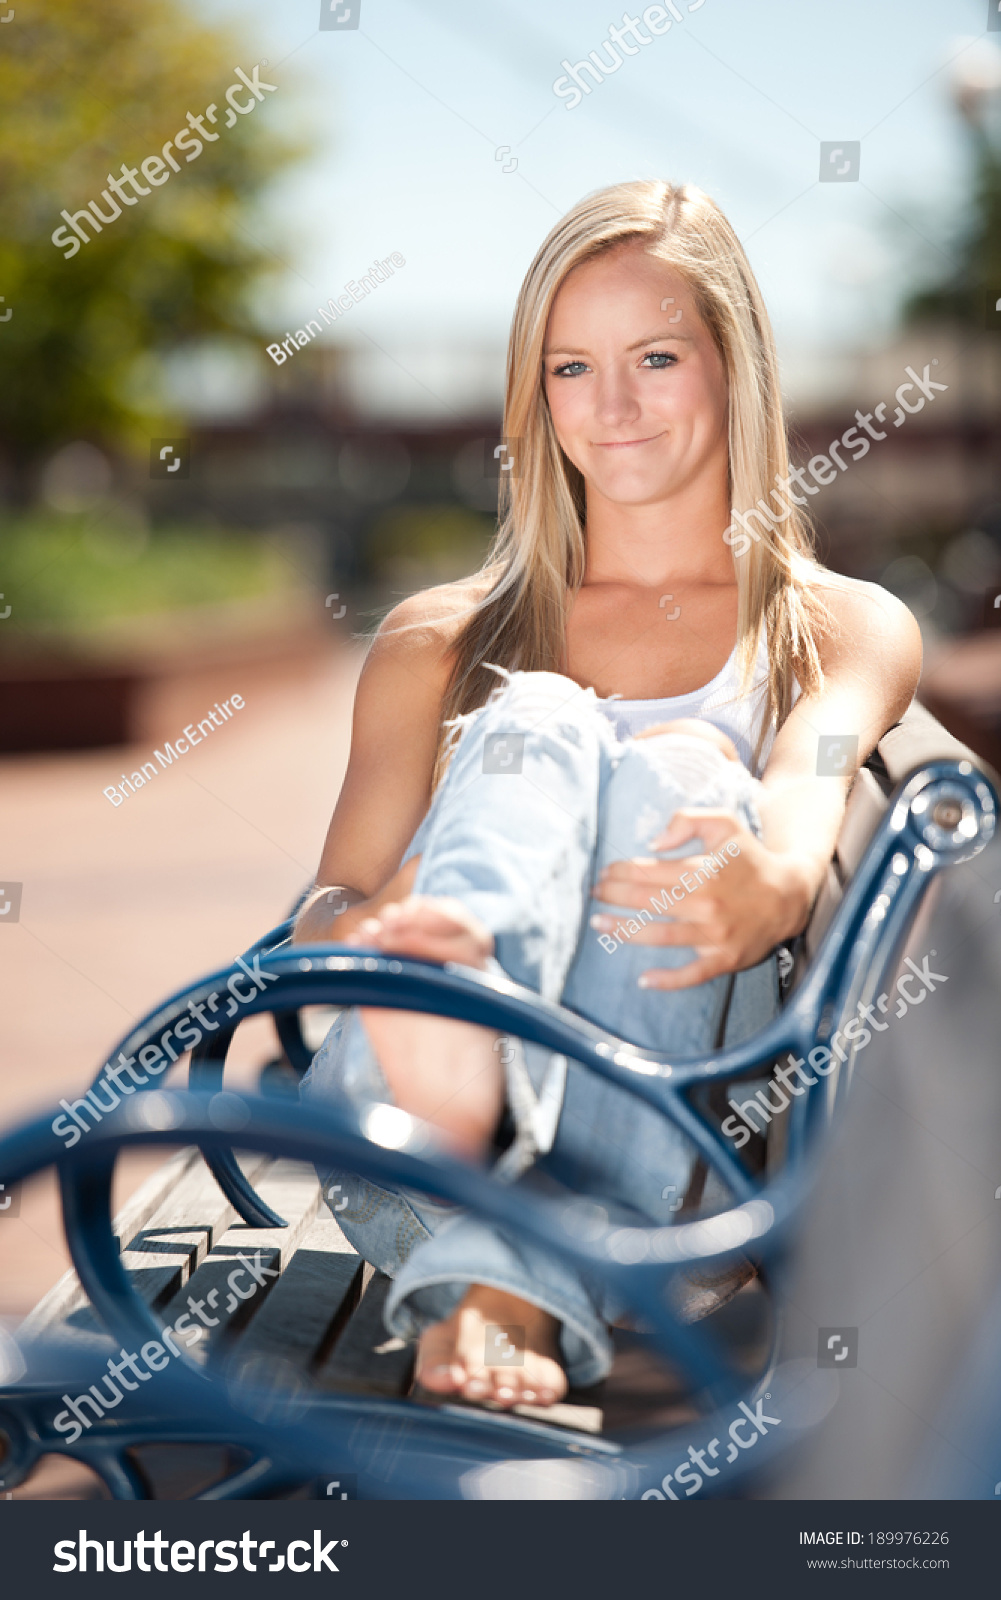 https://image.shutterstock.com/shutterstock/photos/189976226/display_1500/stock-photo-portrait-of-smiling-young-woman-sitting-on-park-bench-189976226.jpg